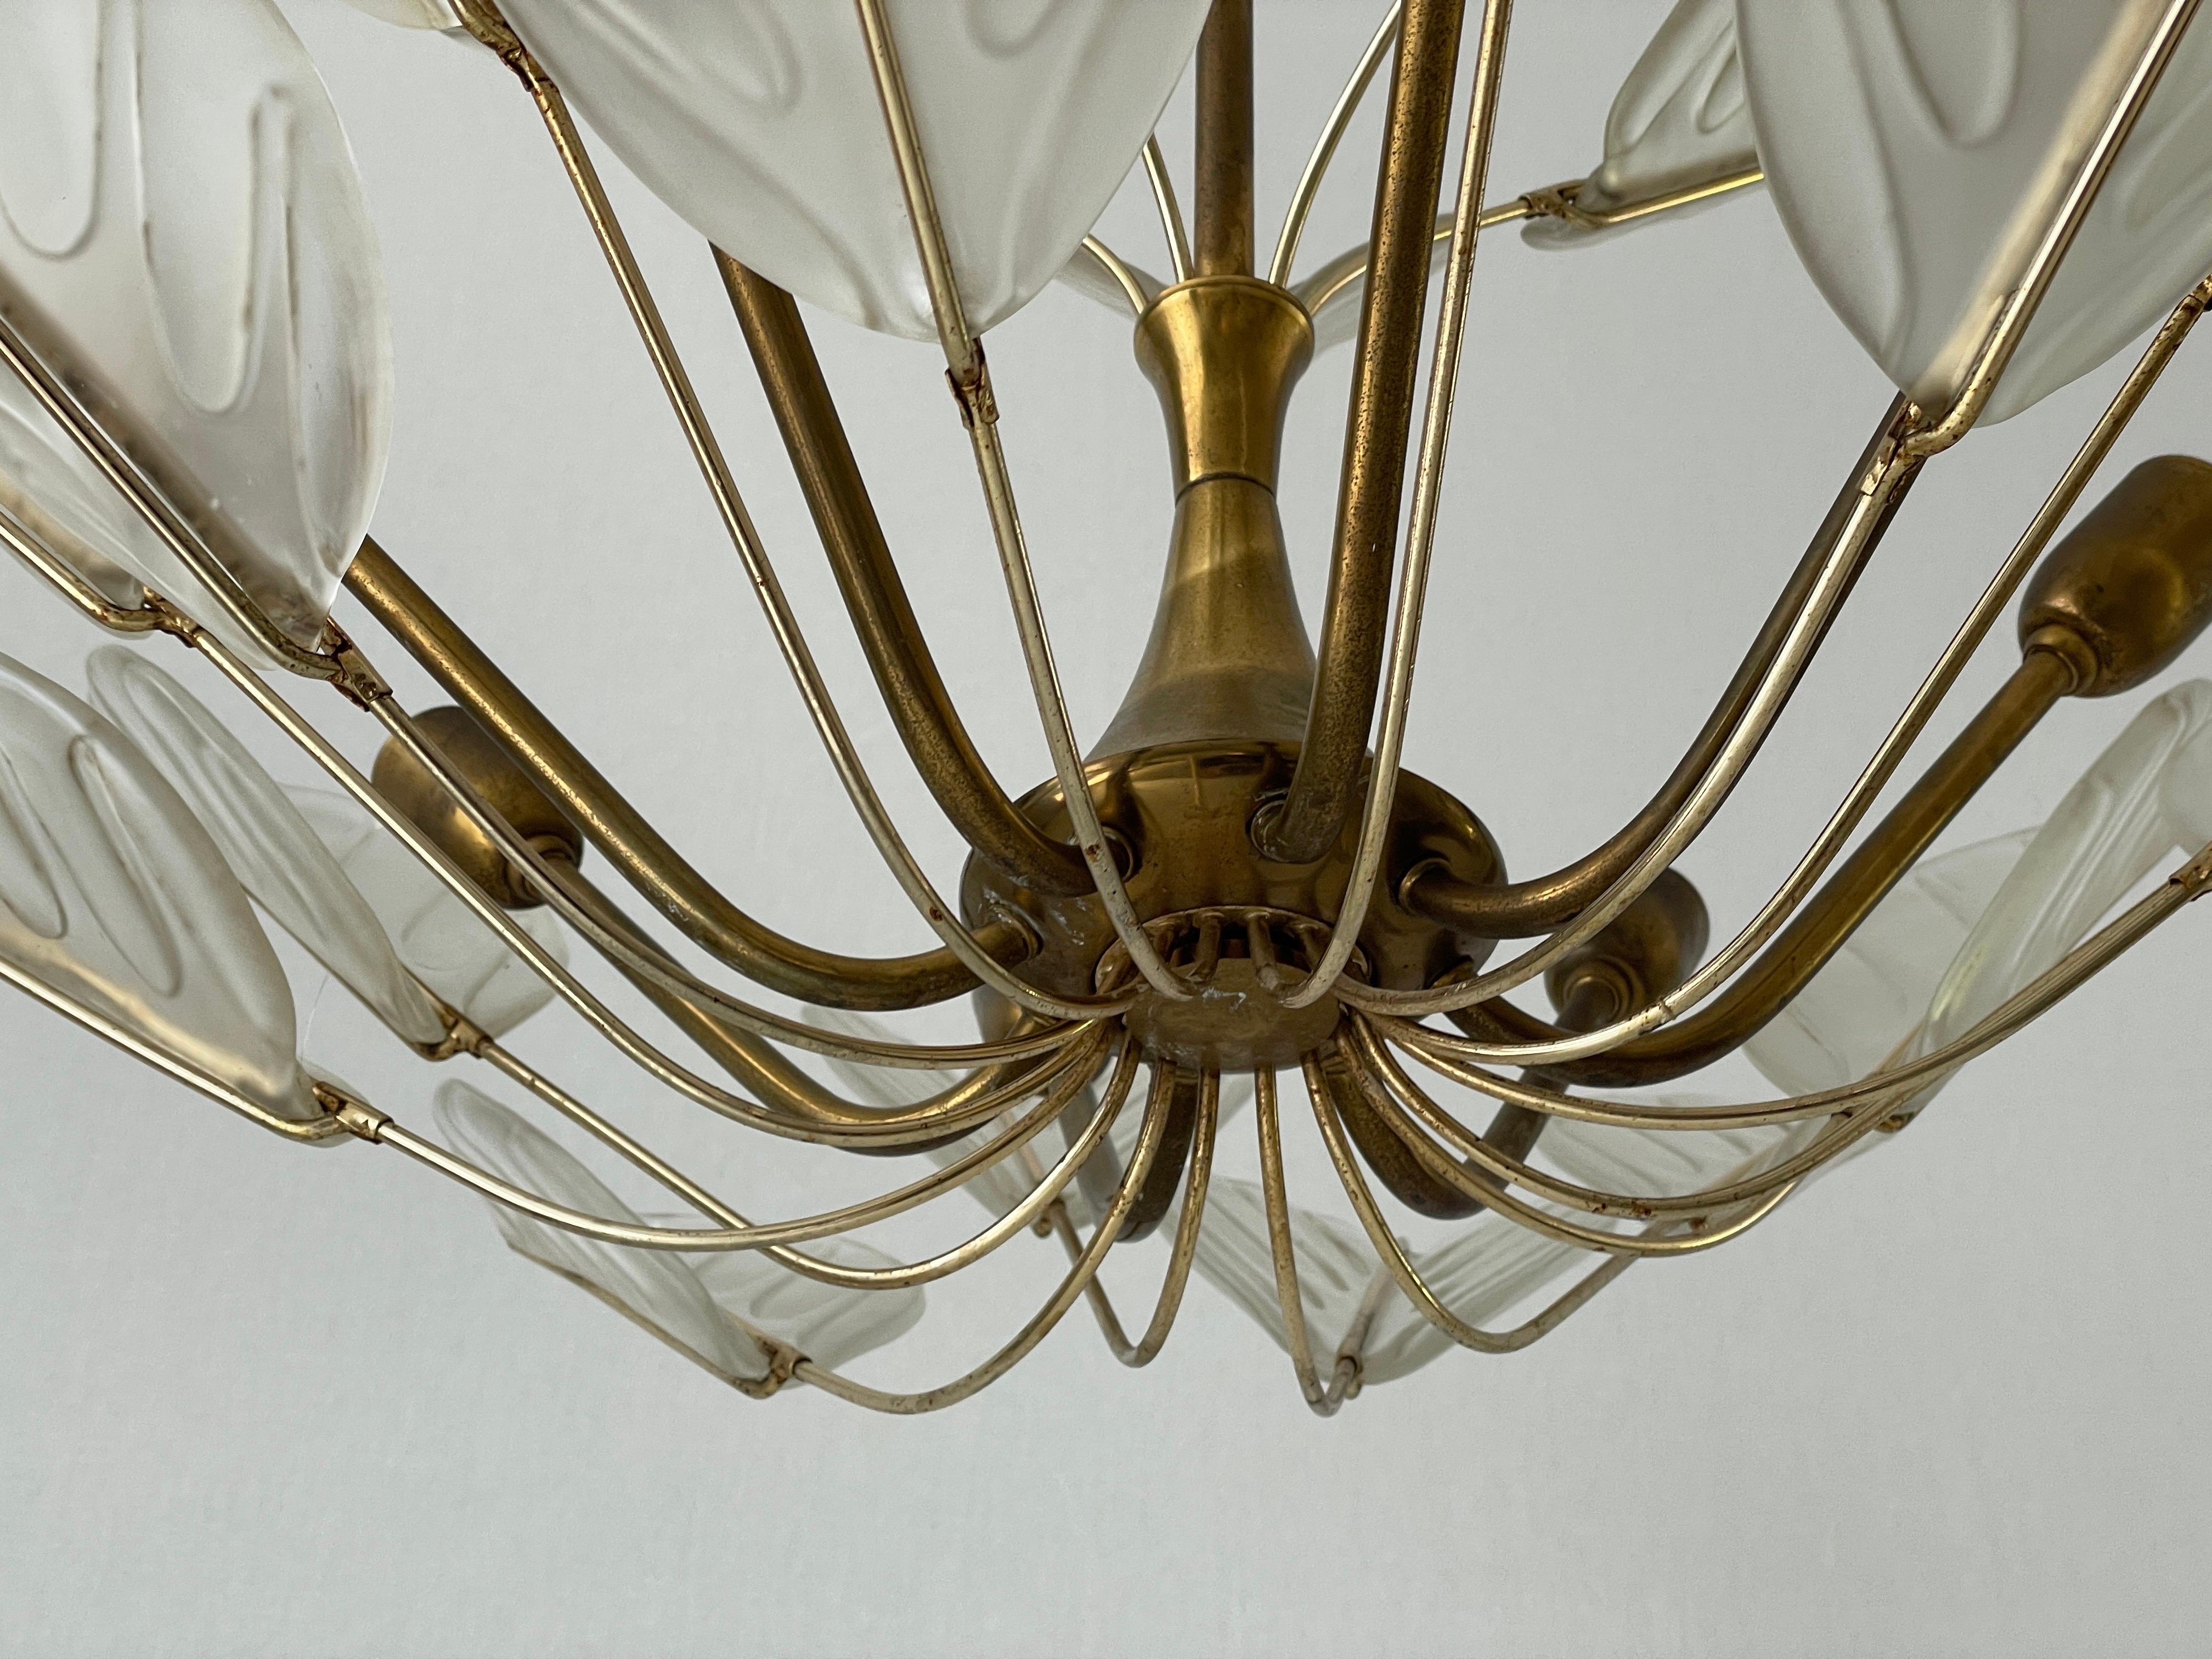 Luxurious 8-armed Brass Chandelier with Crystal Glass Leaves, 1960s, Germany For Sale 3